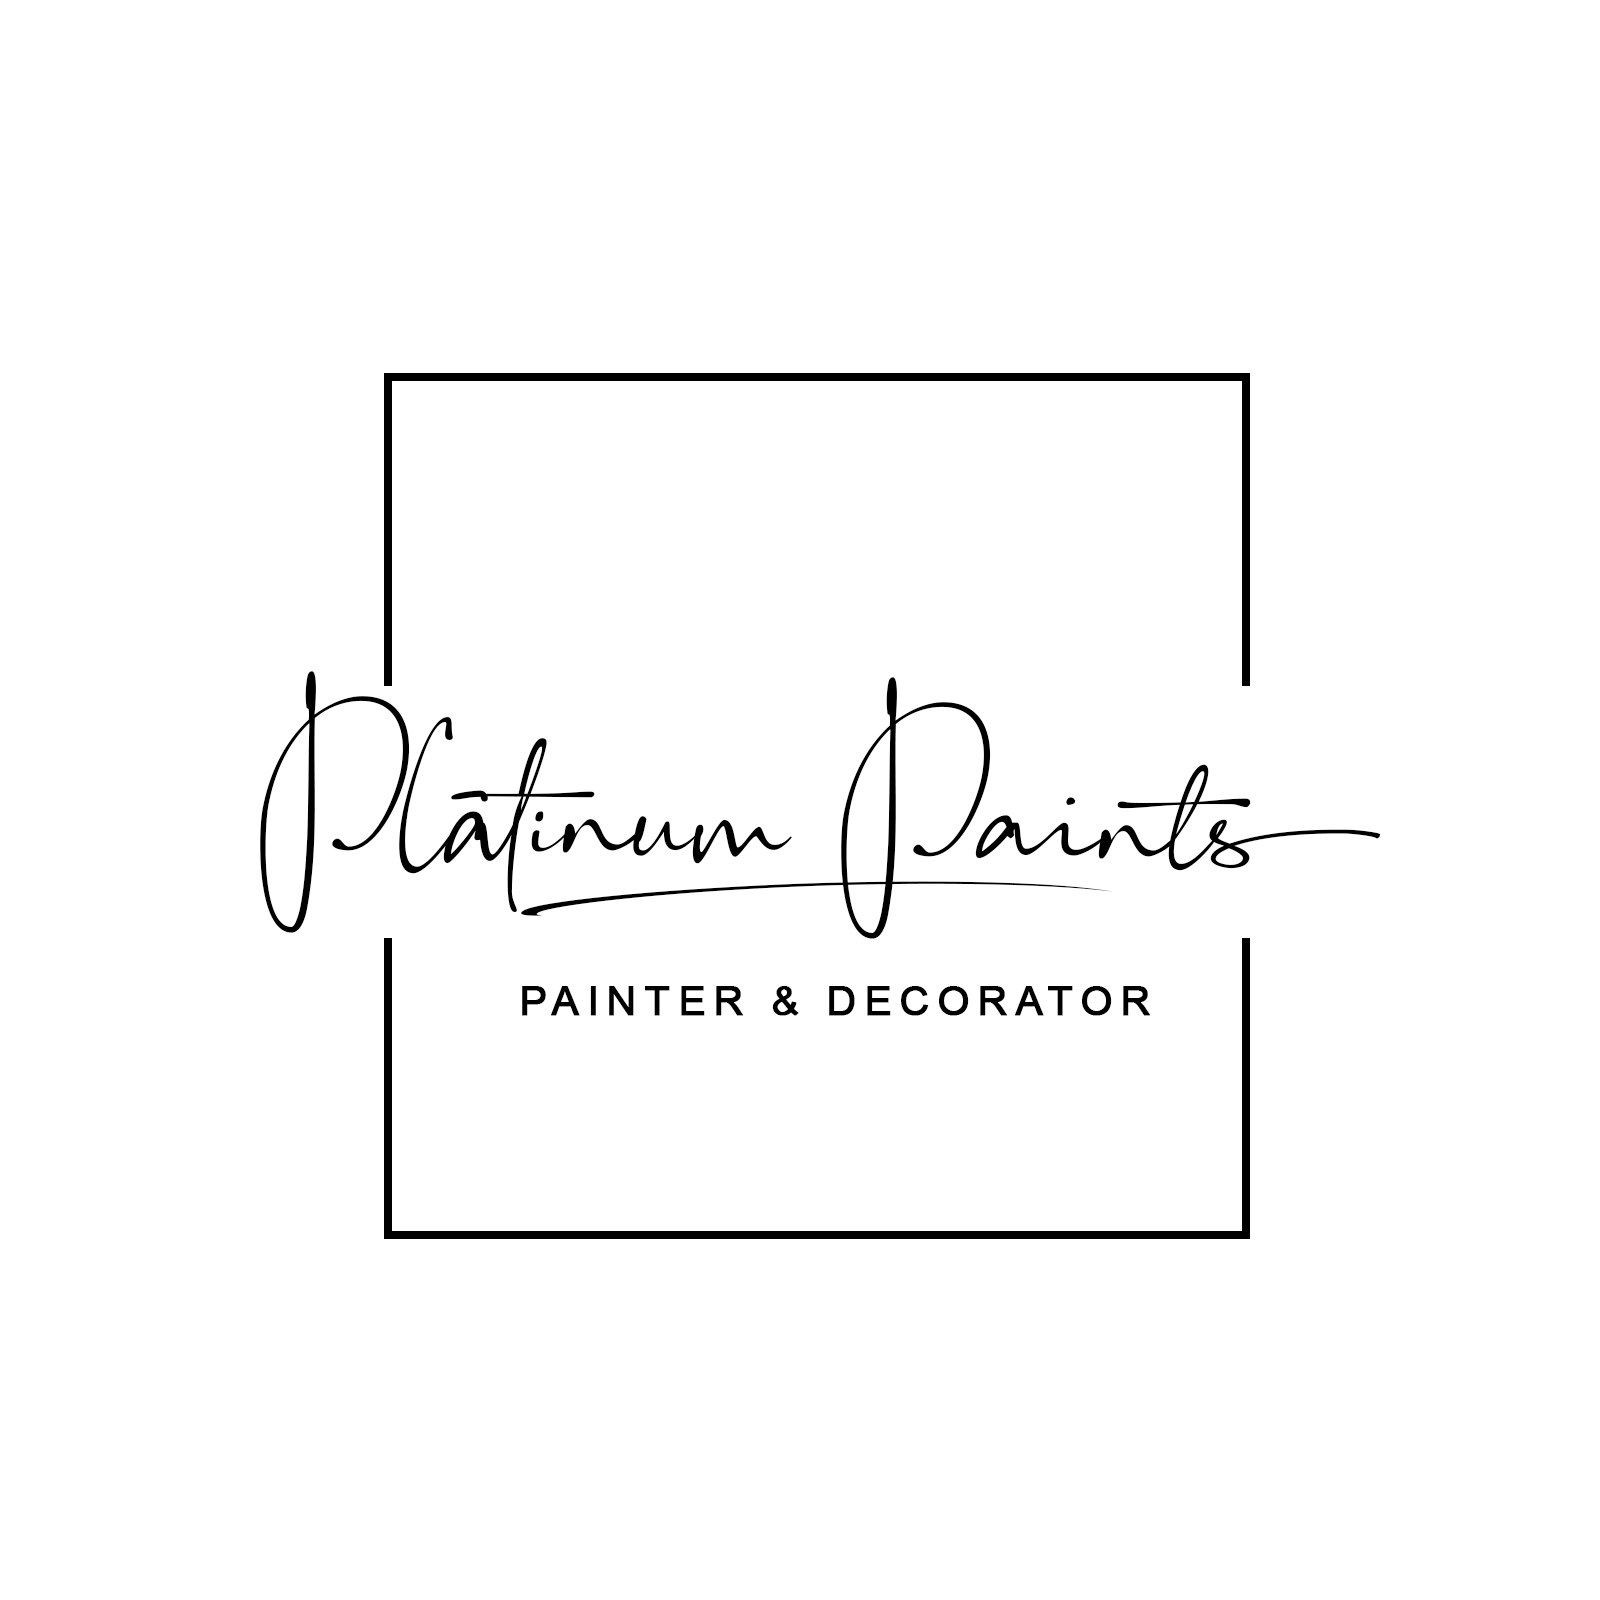 Logo of Platinum paints Painting And Decorating In Richmond, Surrey